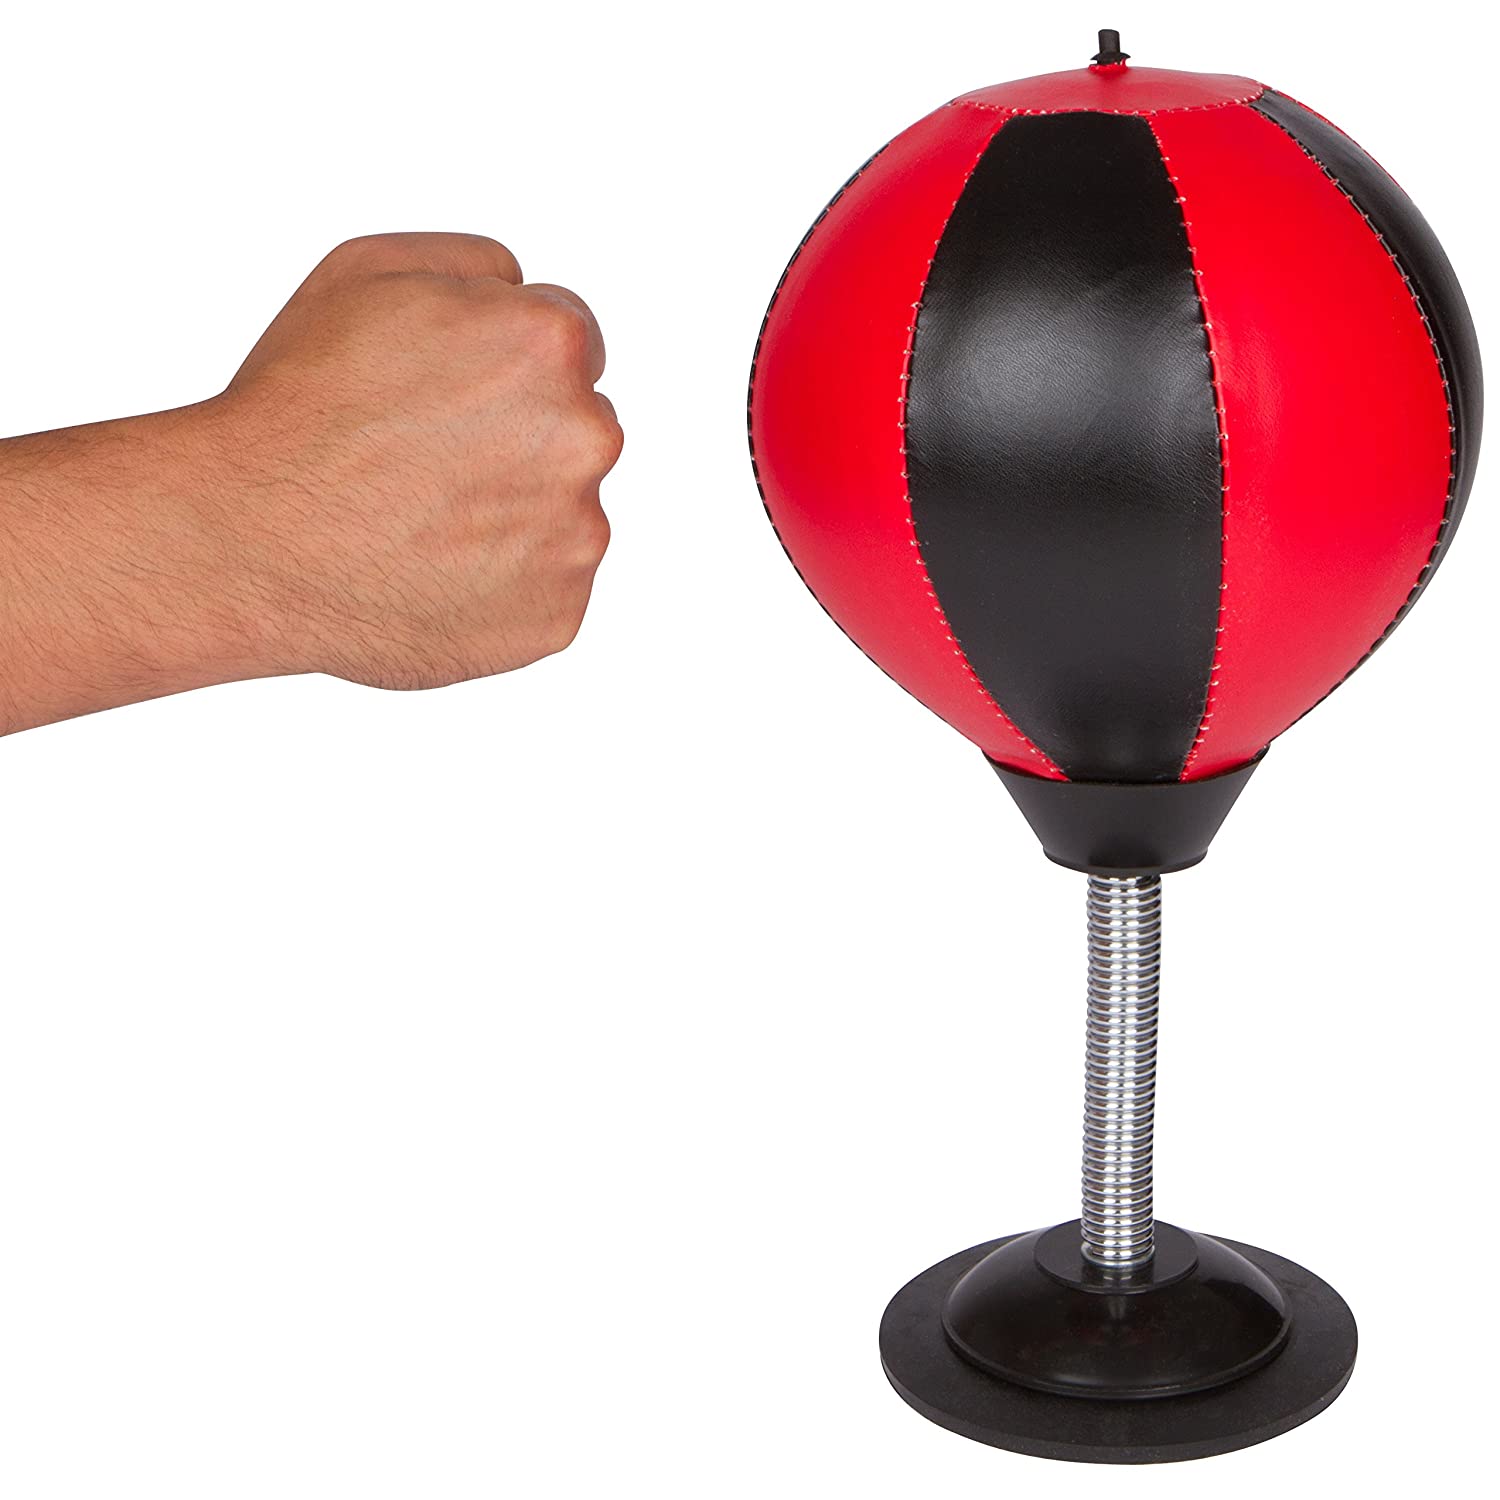 Desk Punching Bag Target Experiment: Good or Unhealthy?